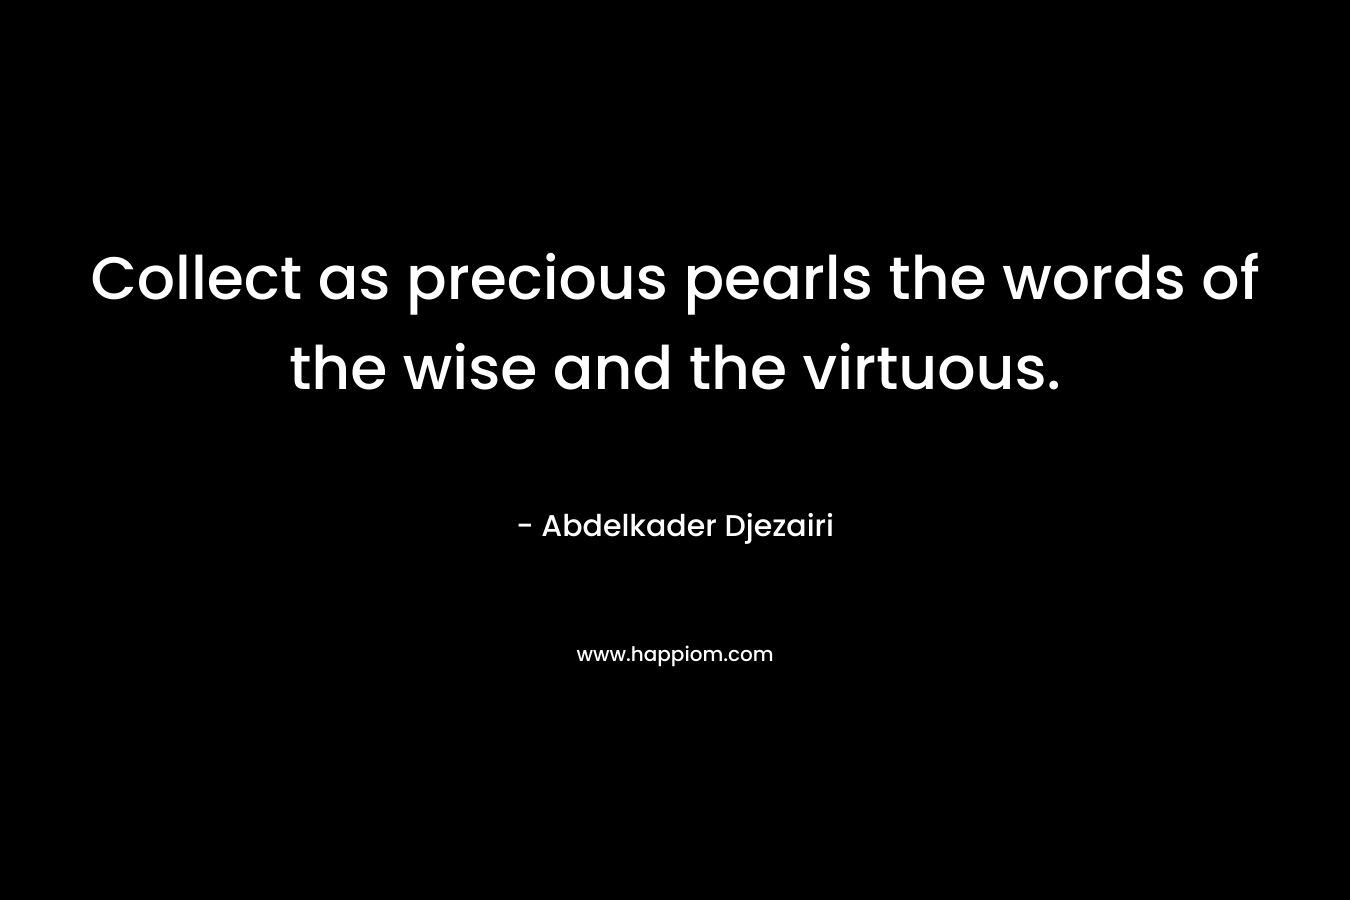 Collect as precious pearls the words of the wise and the virtuous.